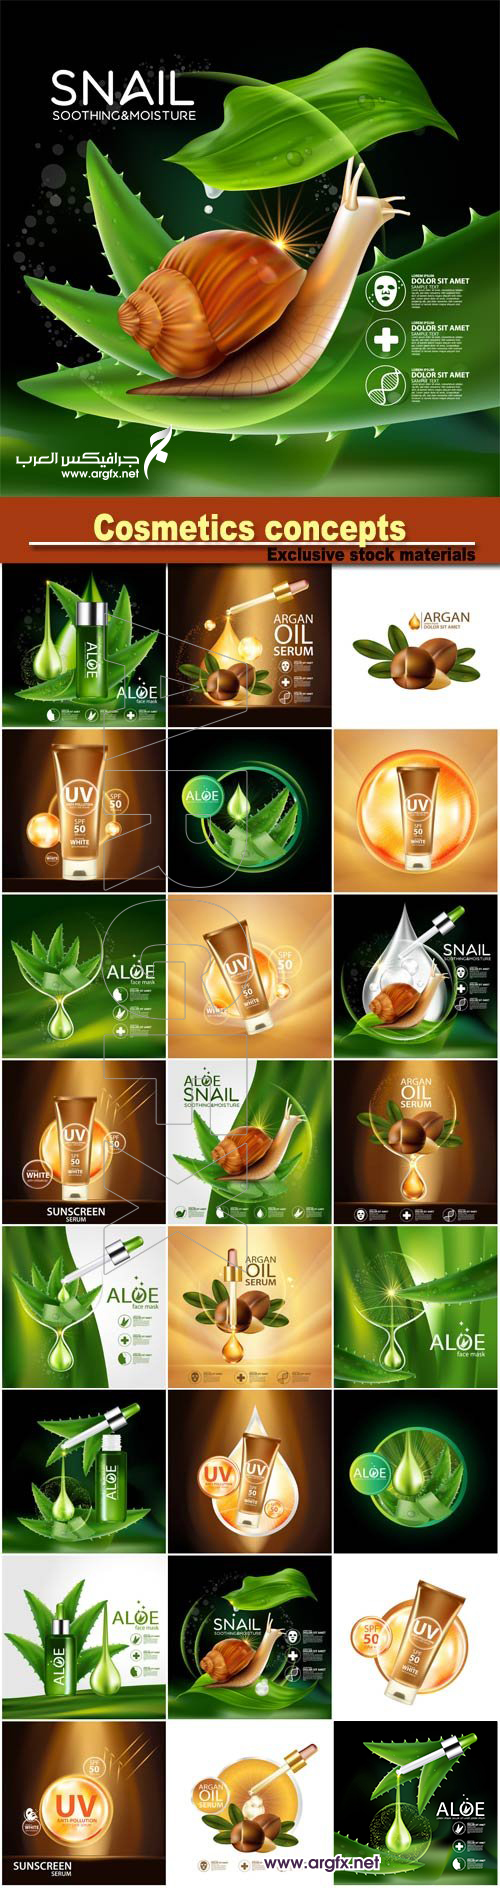  Cosmetics concepts, argan oil serum, aloe snail soothing and moisture